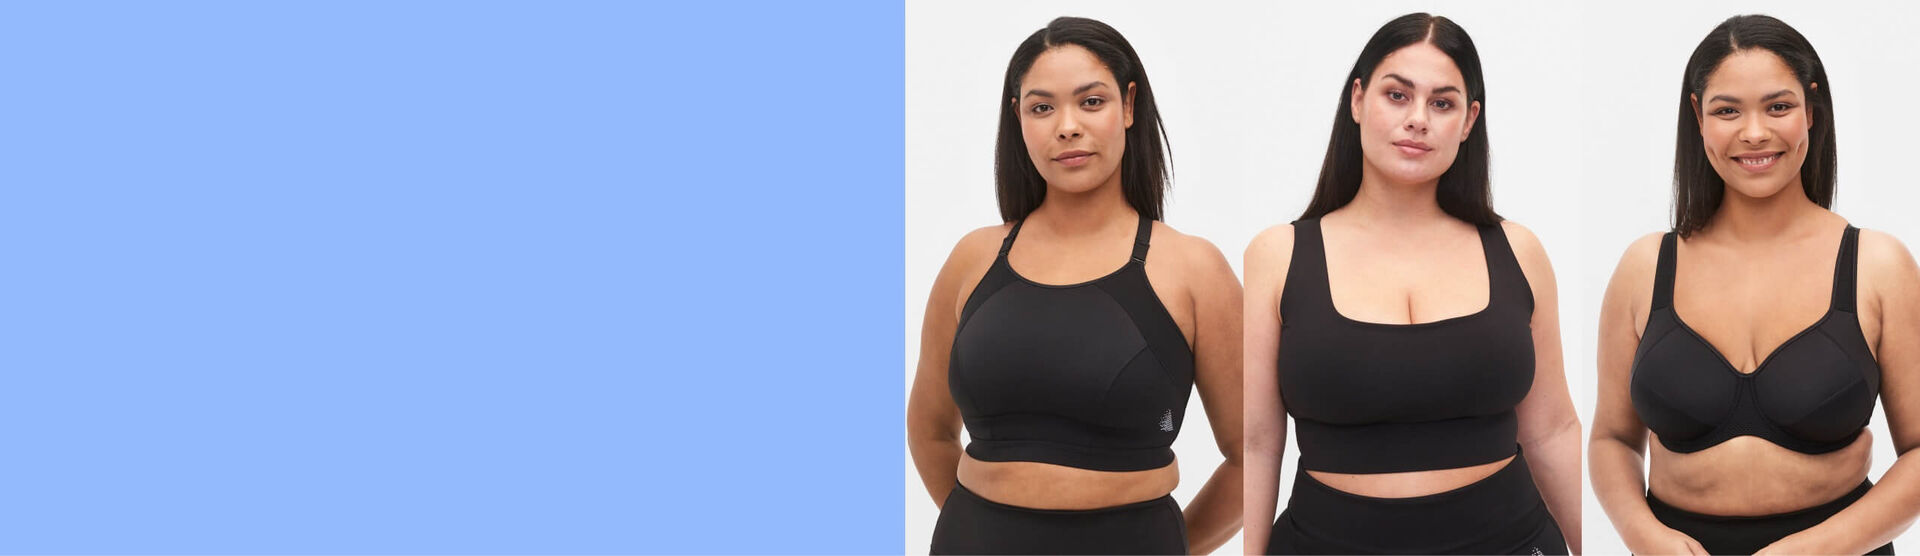 Aueoeo Girls Sports Bra, Bras for Large Breasted Women Women's